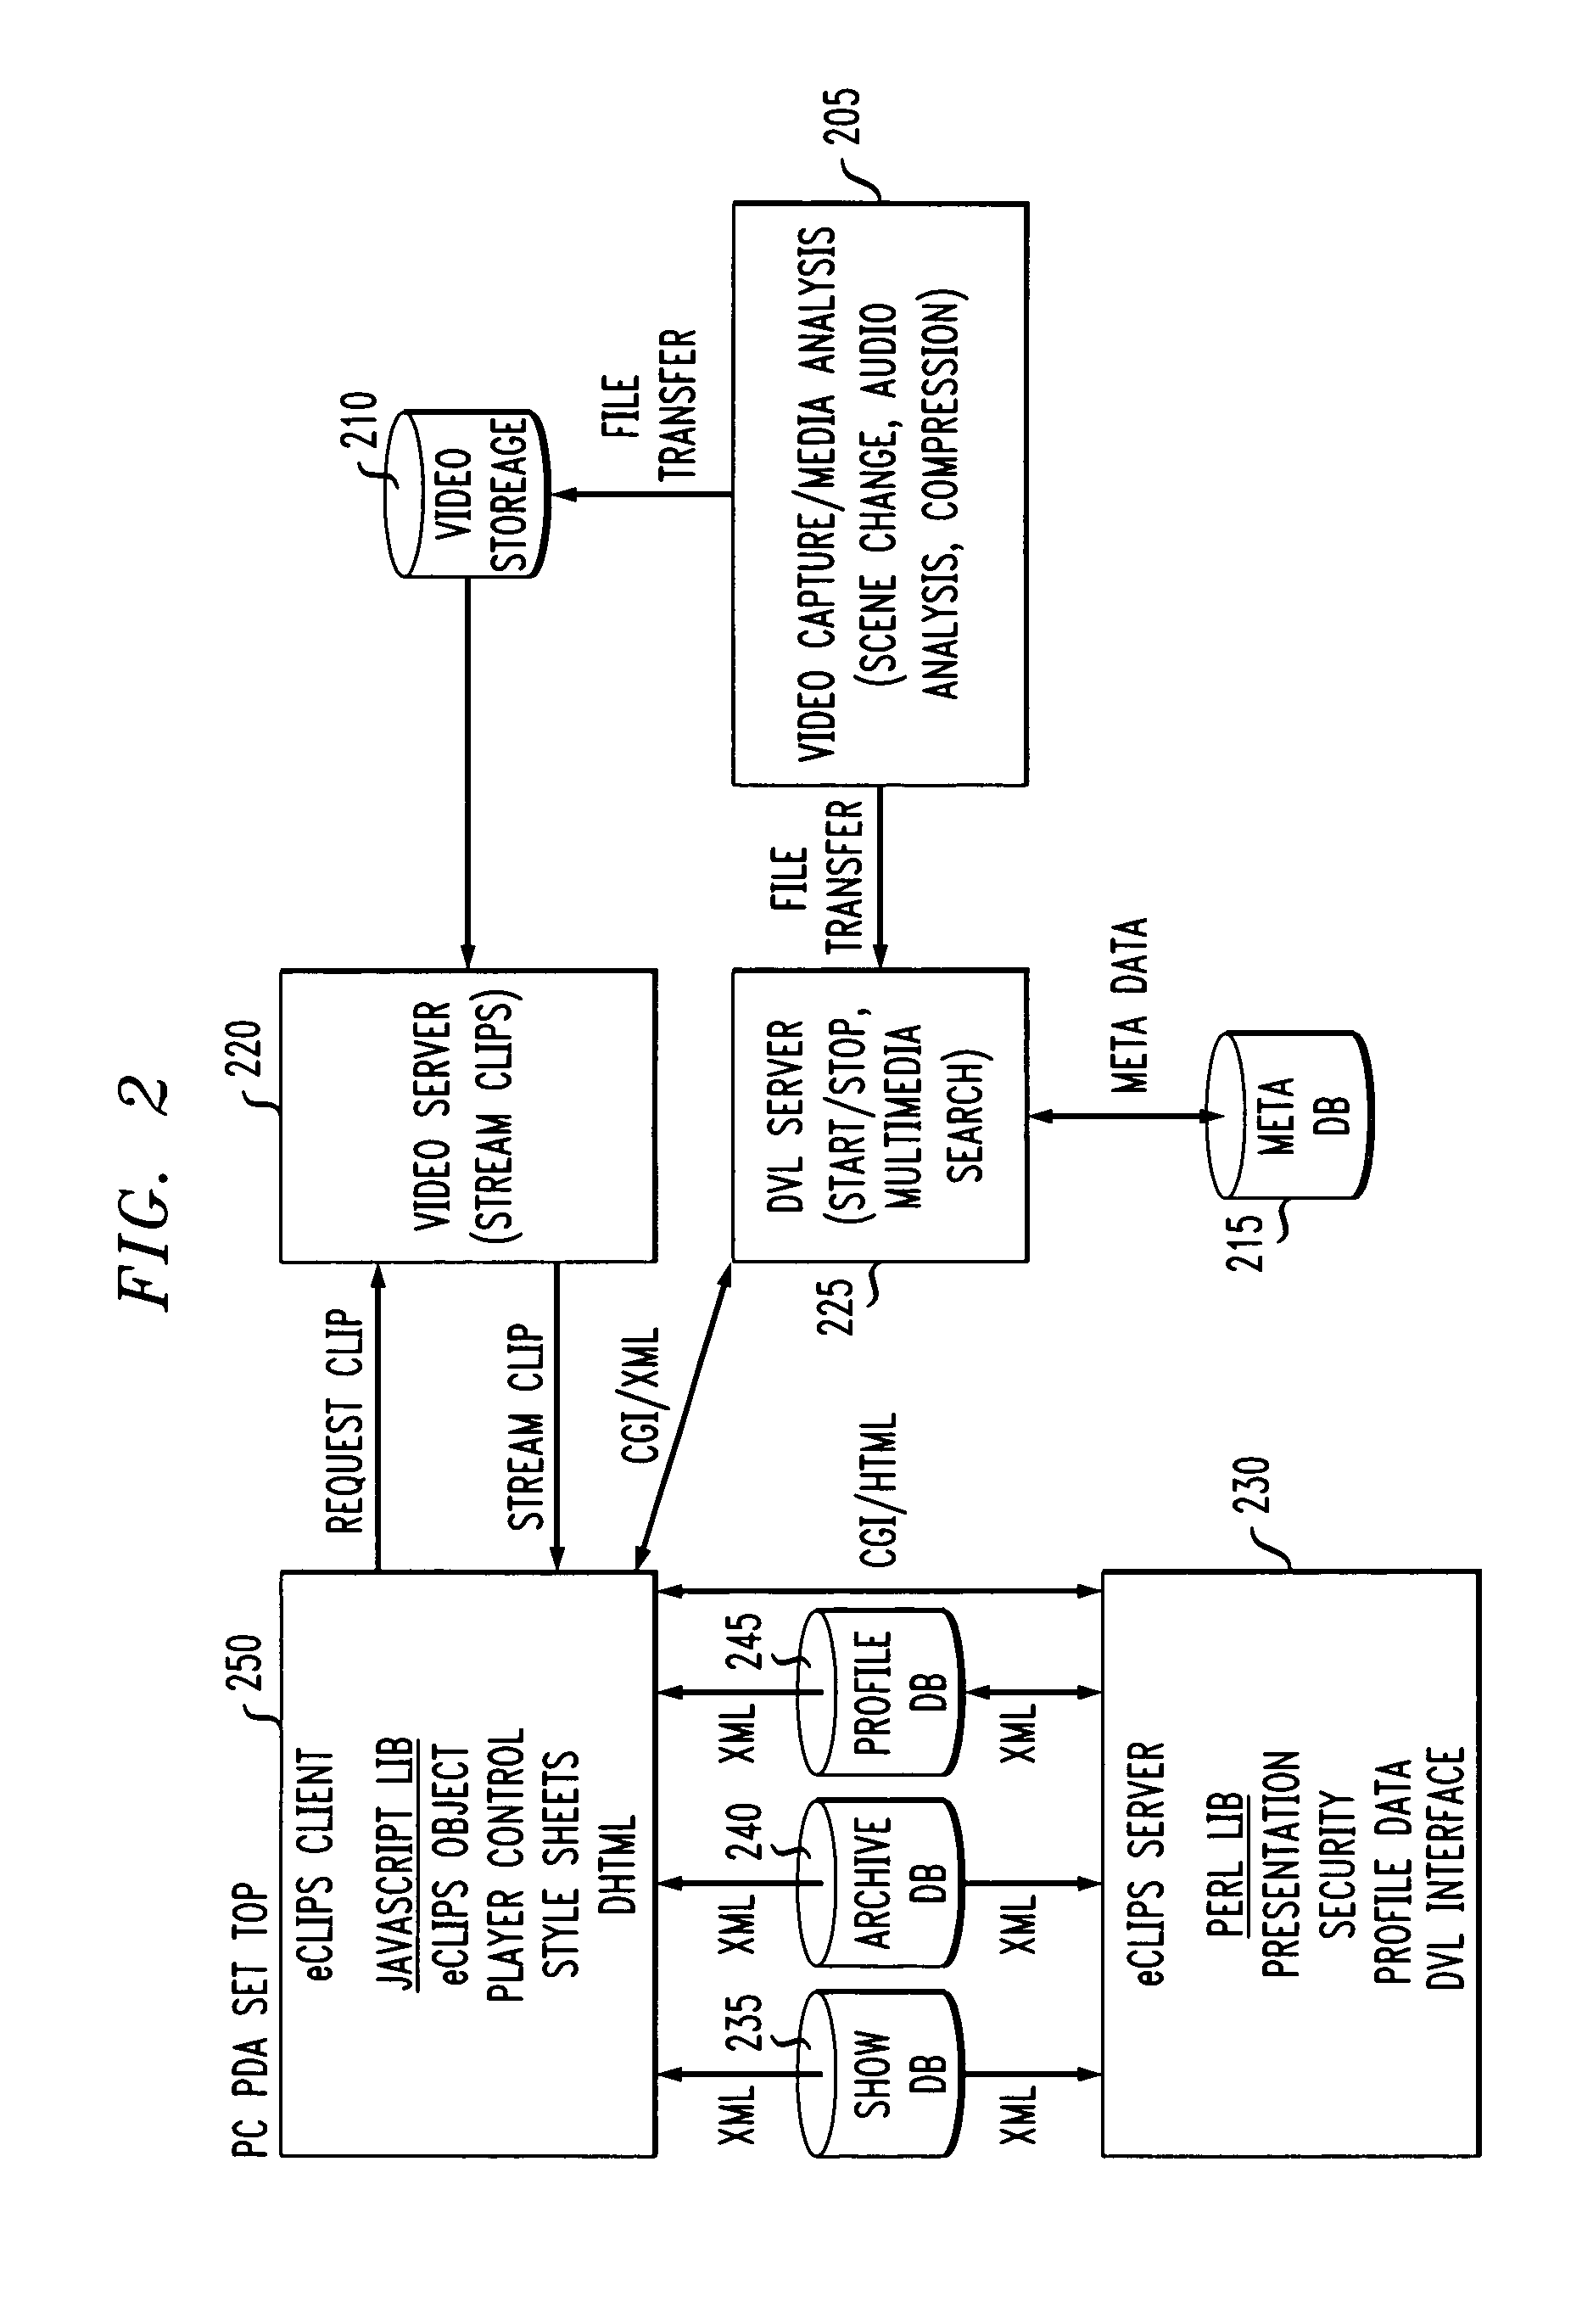 Method and system for embedding information into streaming media